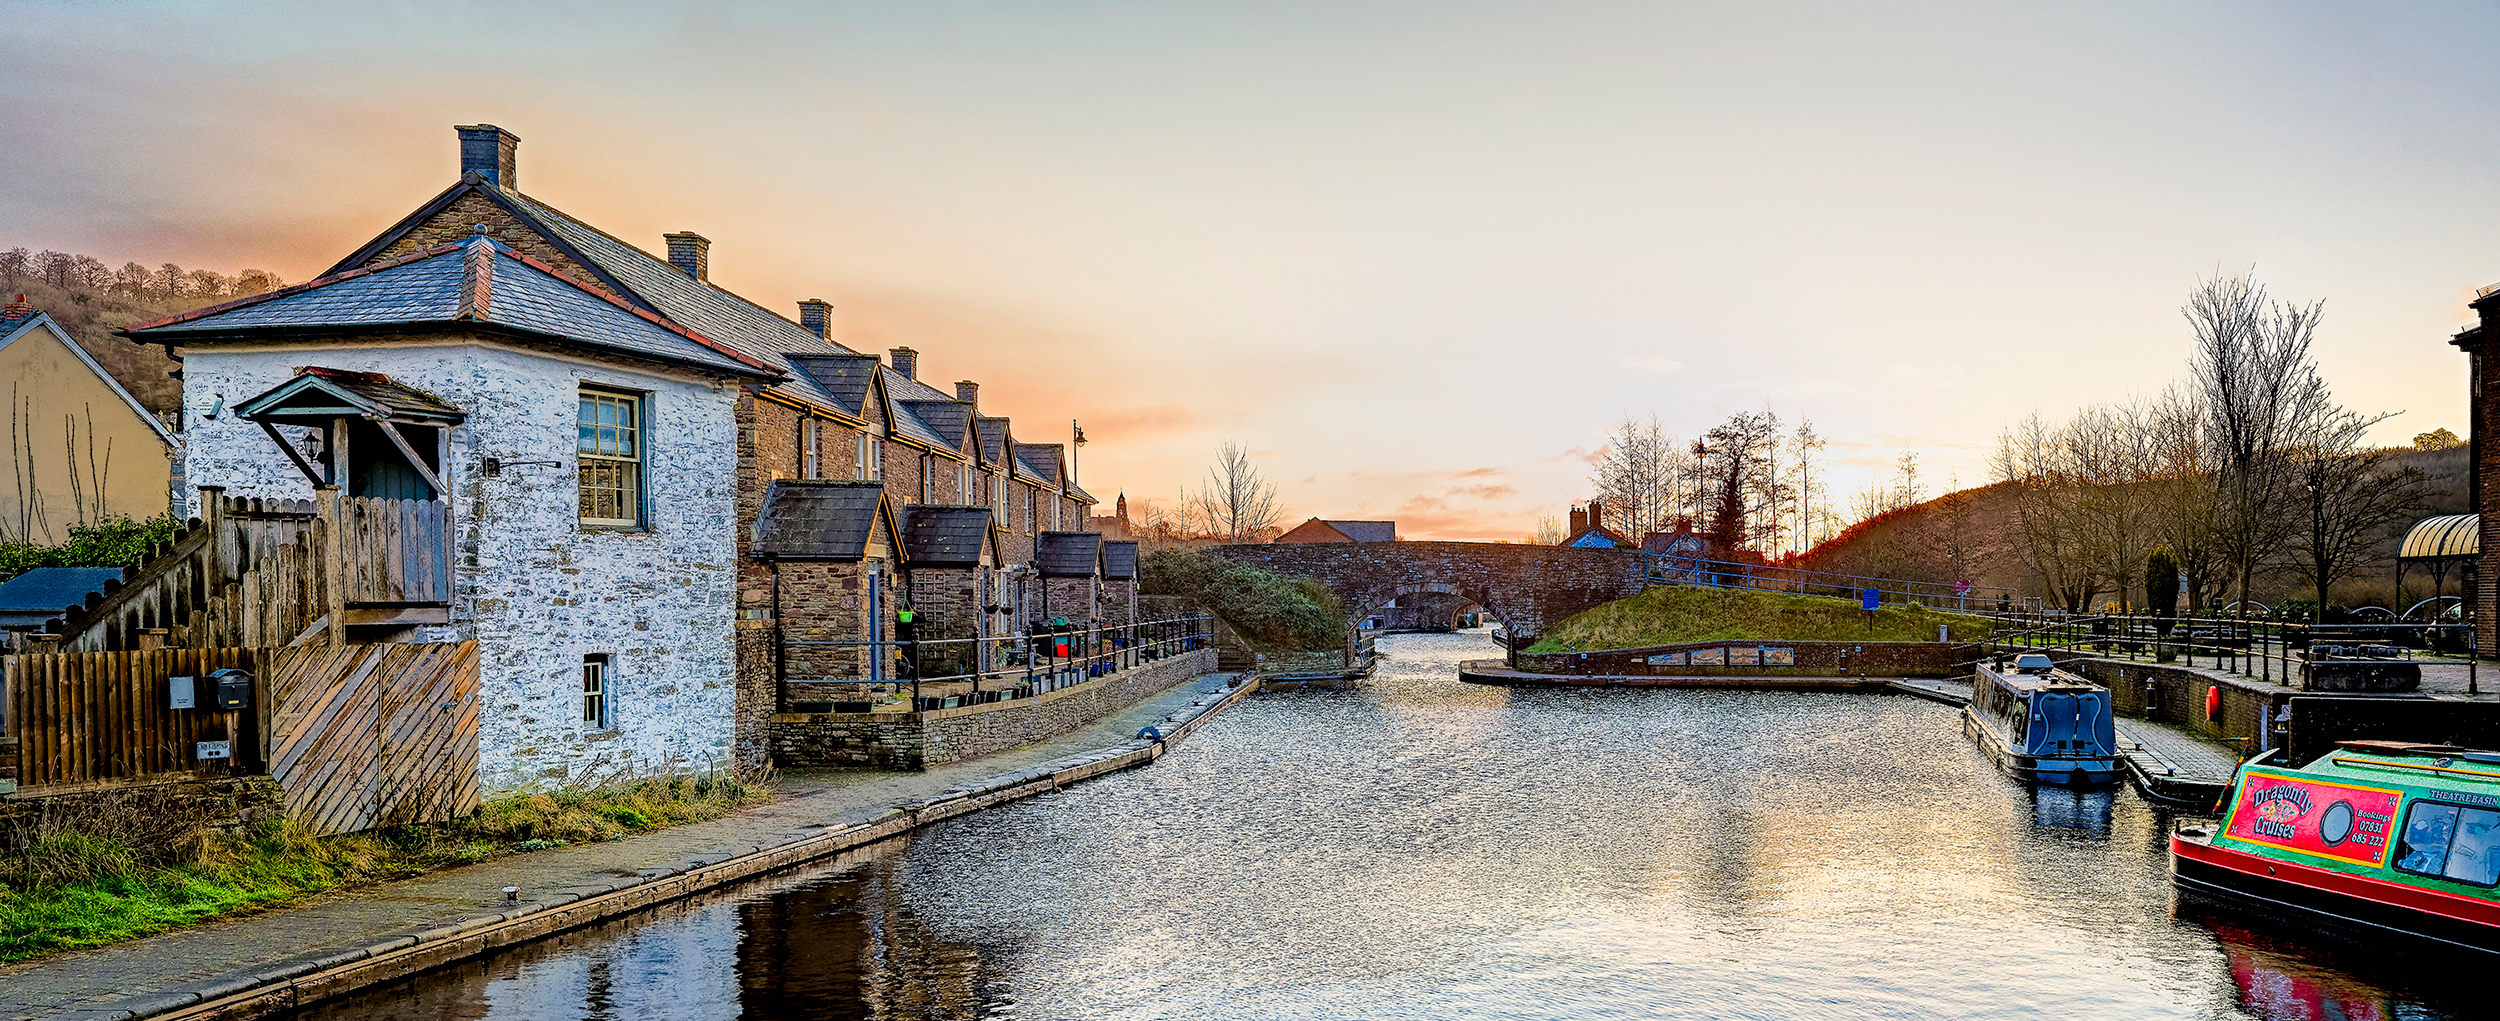 Image of Brecon canal with a colourful long boat in the foreground and a row of welsh cottages in the background